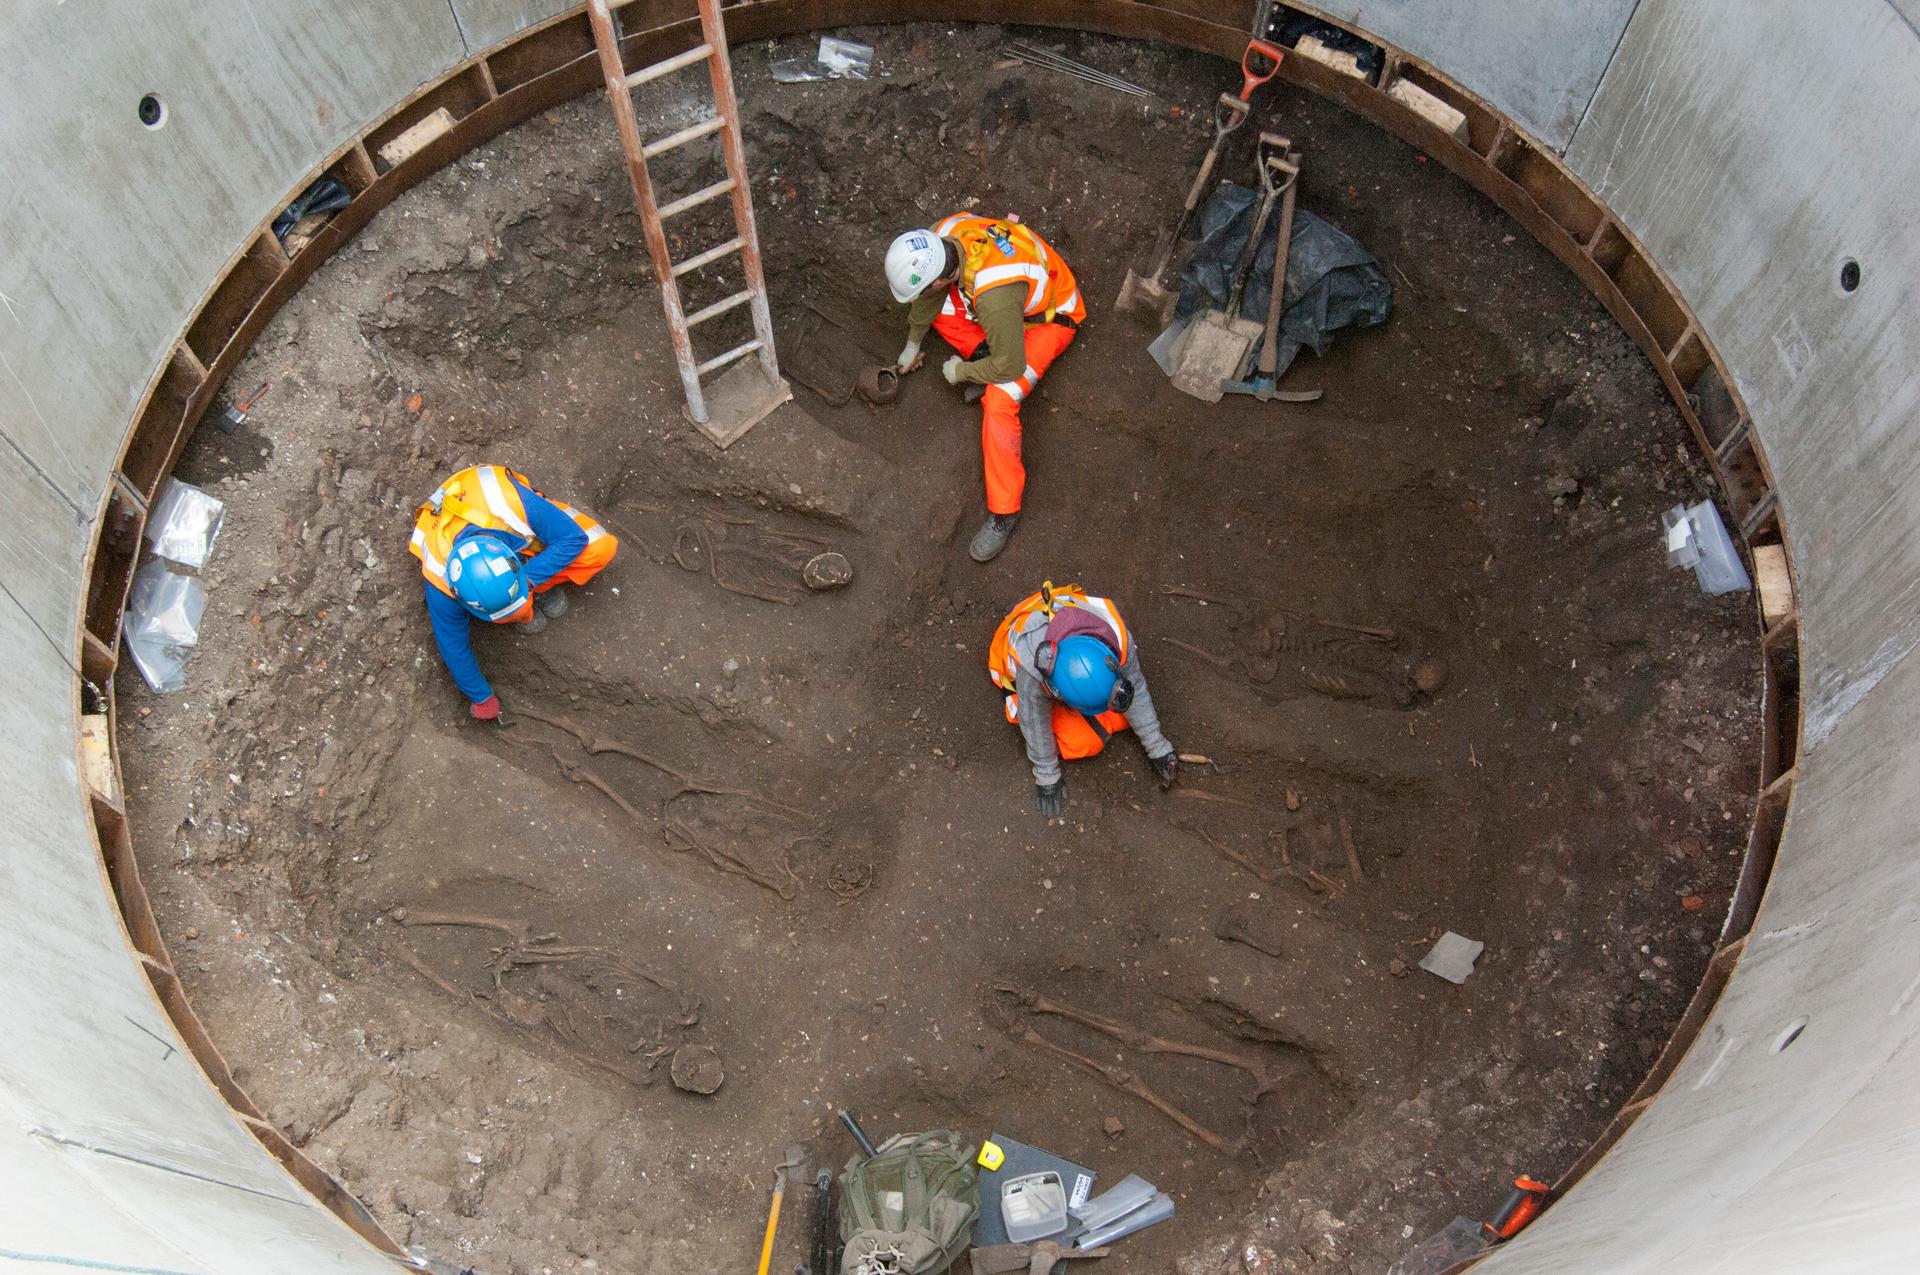 Archaeologists work on unearthed skeletons in the Farringdon area of London in this undated handout photograph released March 15, 2013. Archaeologists said on Friday they had found a graveyard during excavations for a rail project in London which might ho